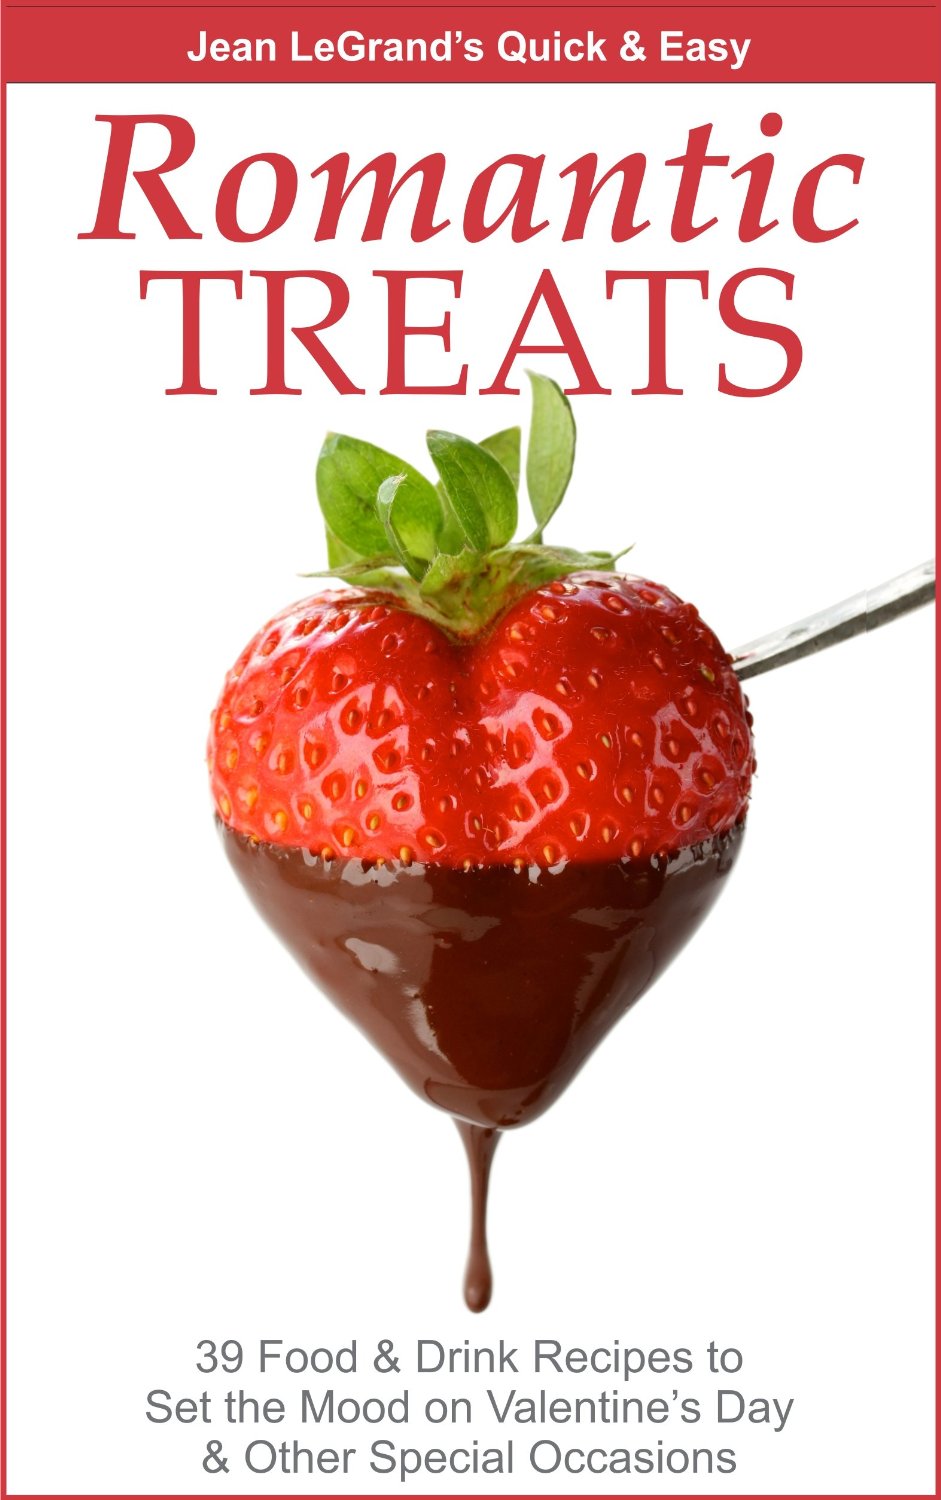 Romantic Treats – 39 Food & Drink Recipes to Set the Mood on Valentine’s Day & Other Special Occasions by Jean LeGrand